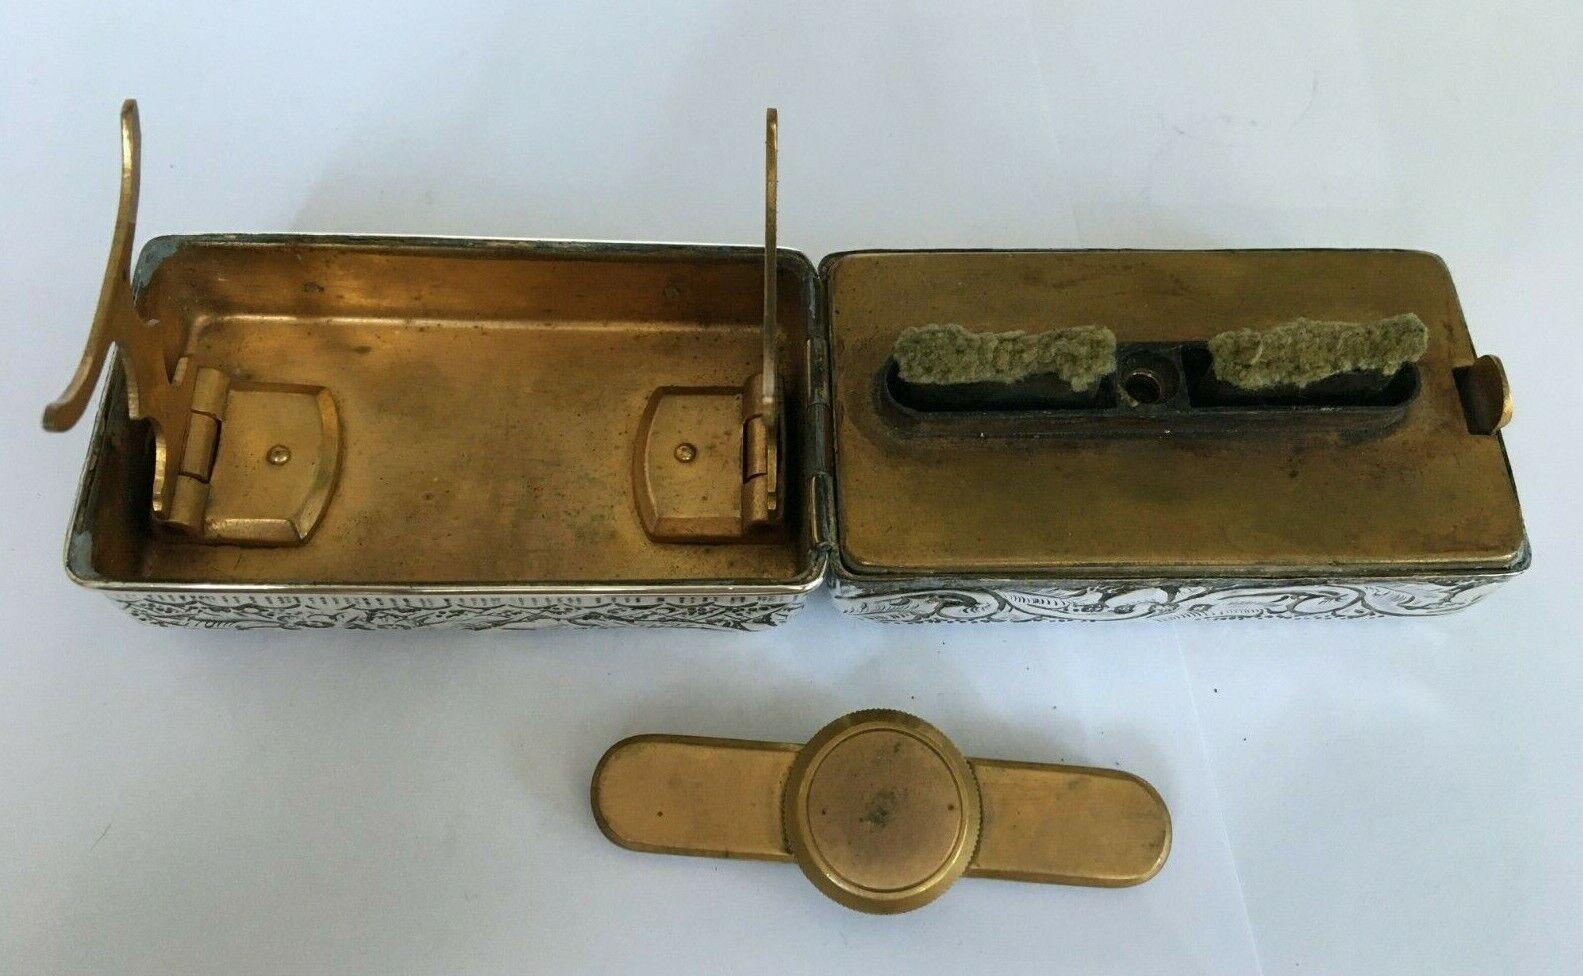 Edwardian Travelling Curling Tong Heater by A & J Zimmermann Ltd in 1903

This unusual piece is in excellent condition. This silver cased portable curling tong heater is of rectangular form.
The outer case is embossed with floral scrolling, the